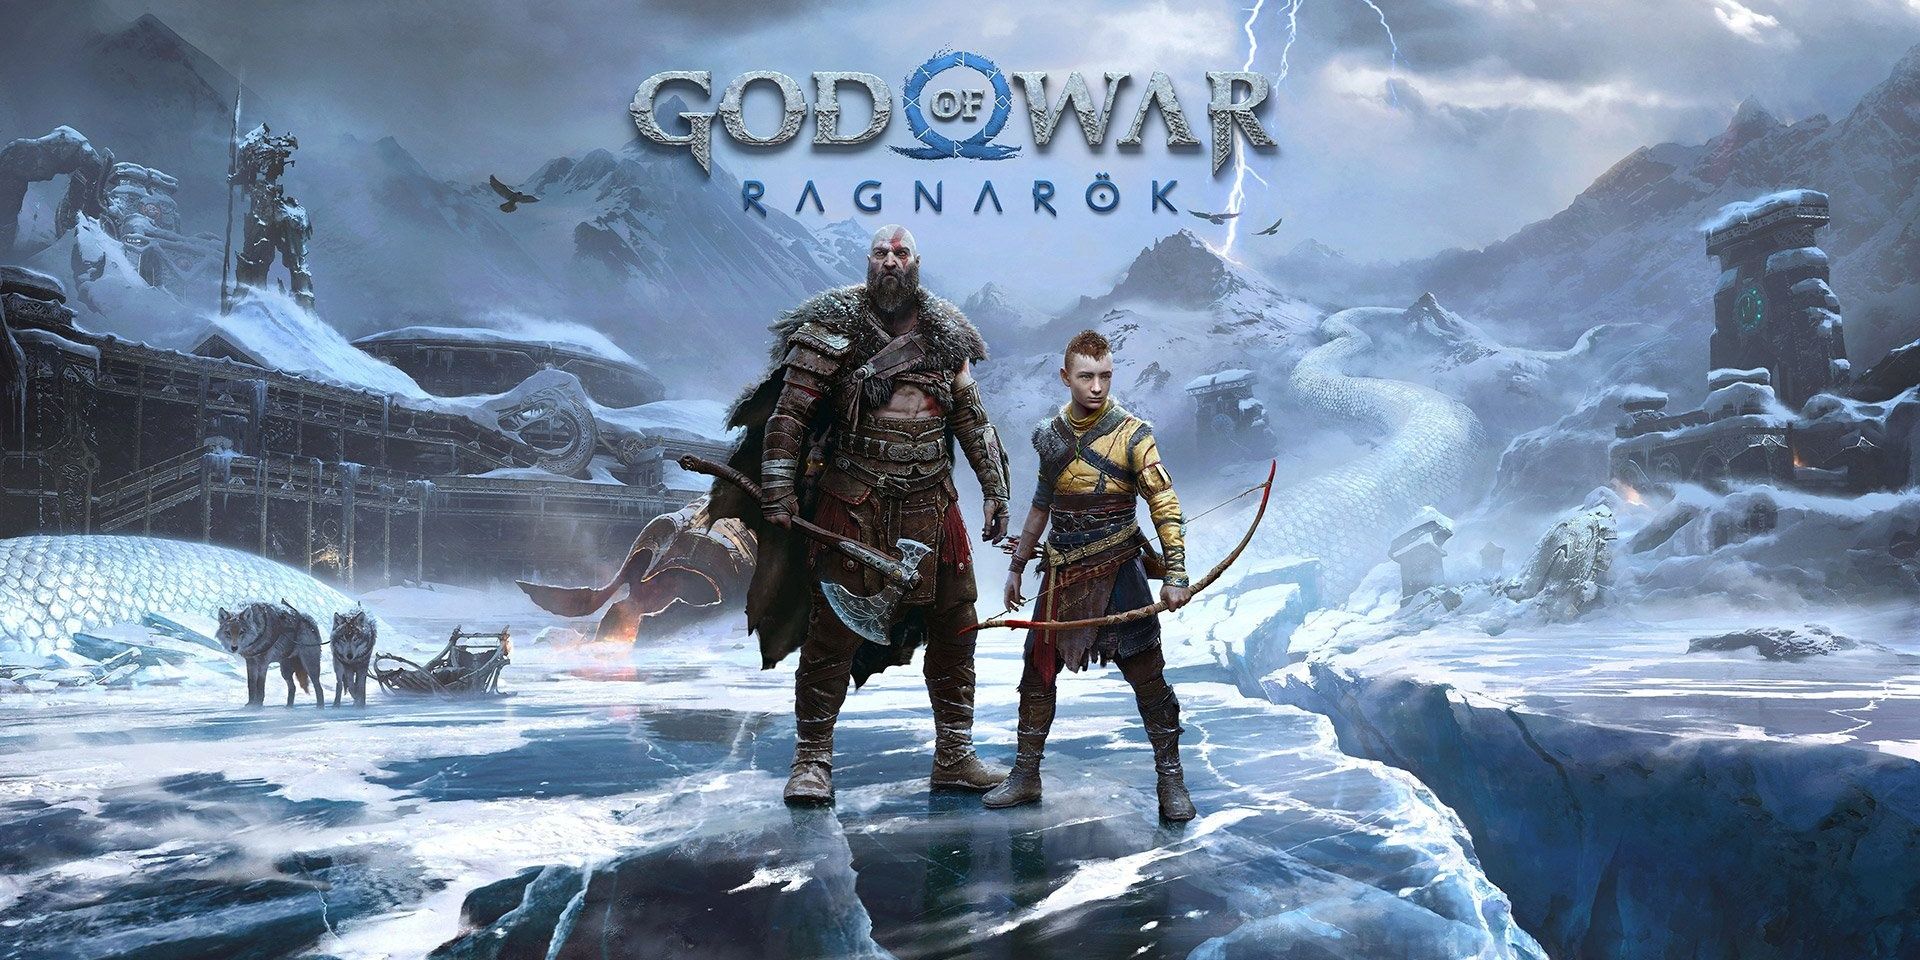 Poster for God of War Ragnarok featuring Kratos and Atreus standing in an icy environment 